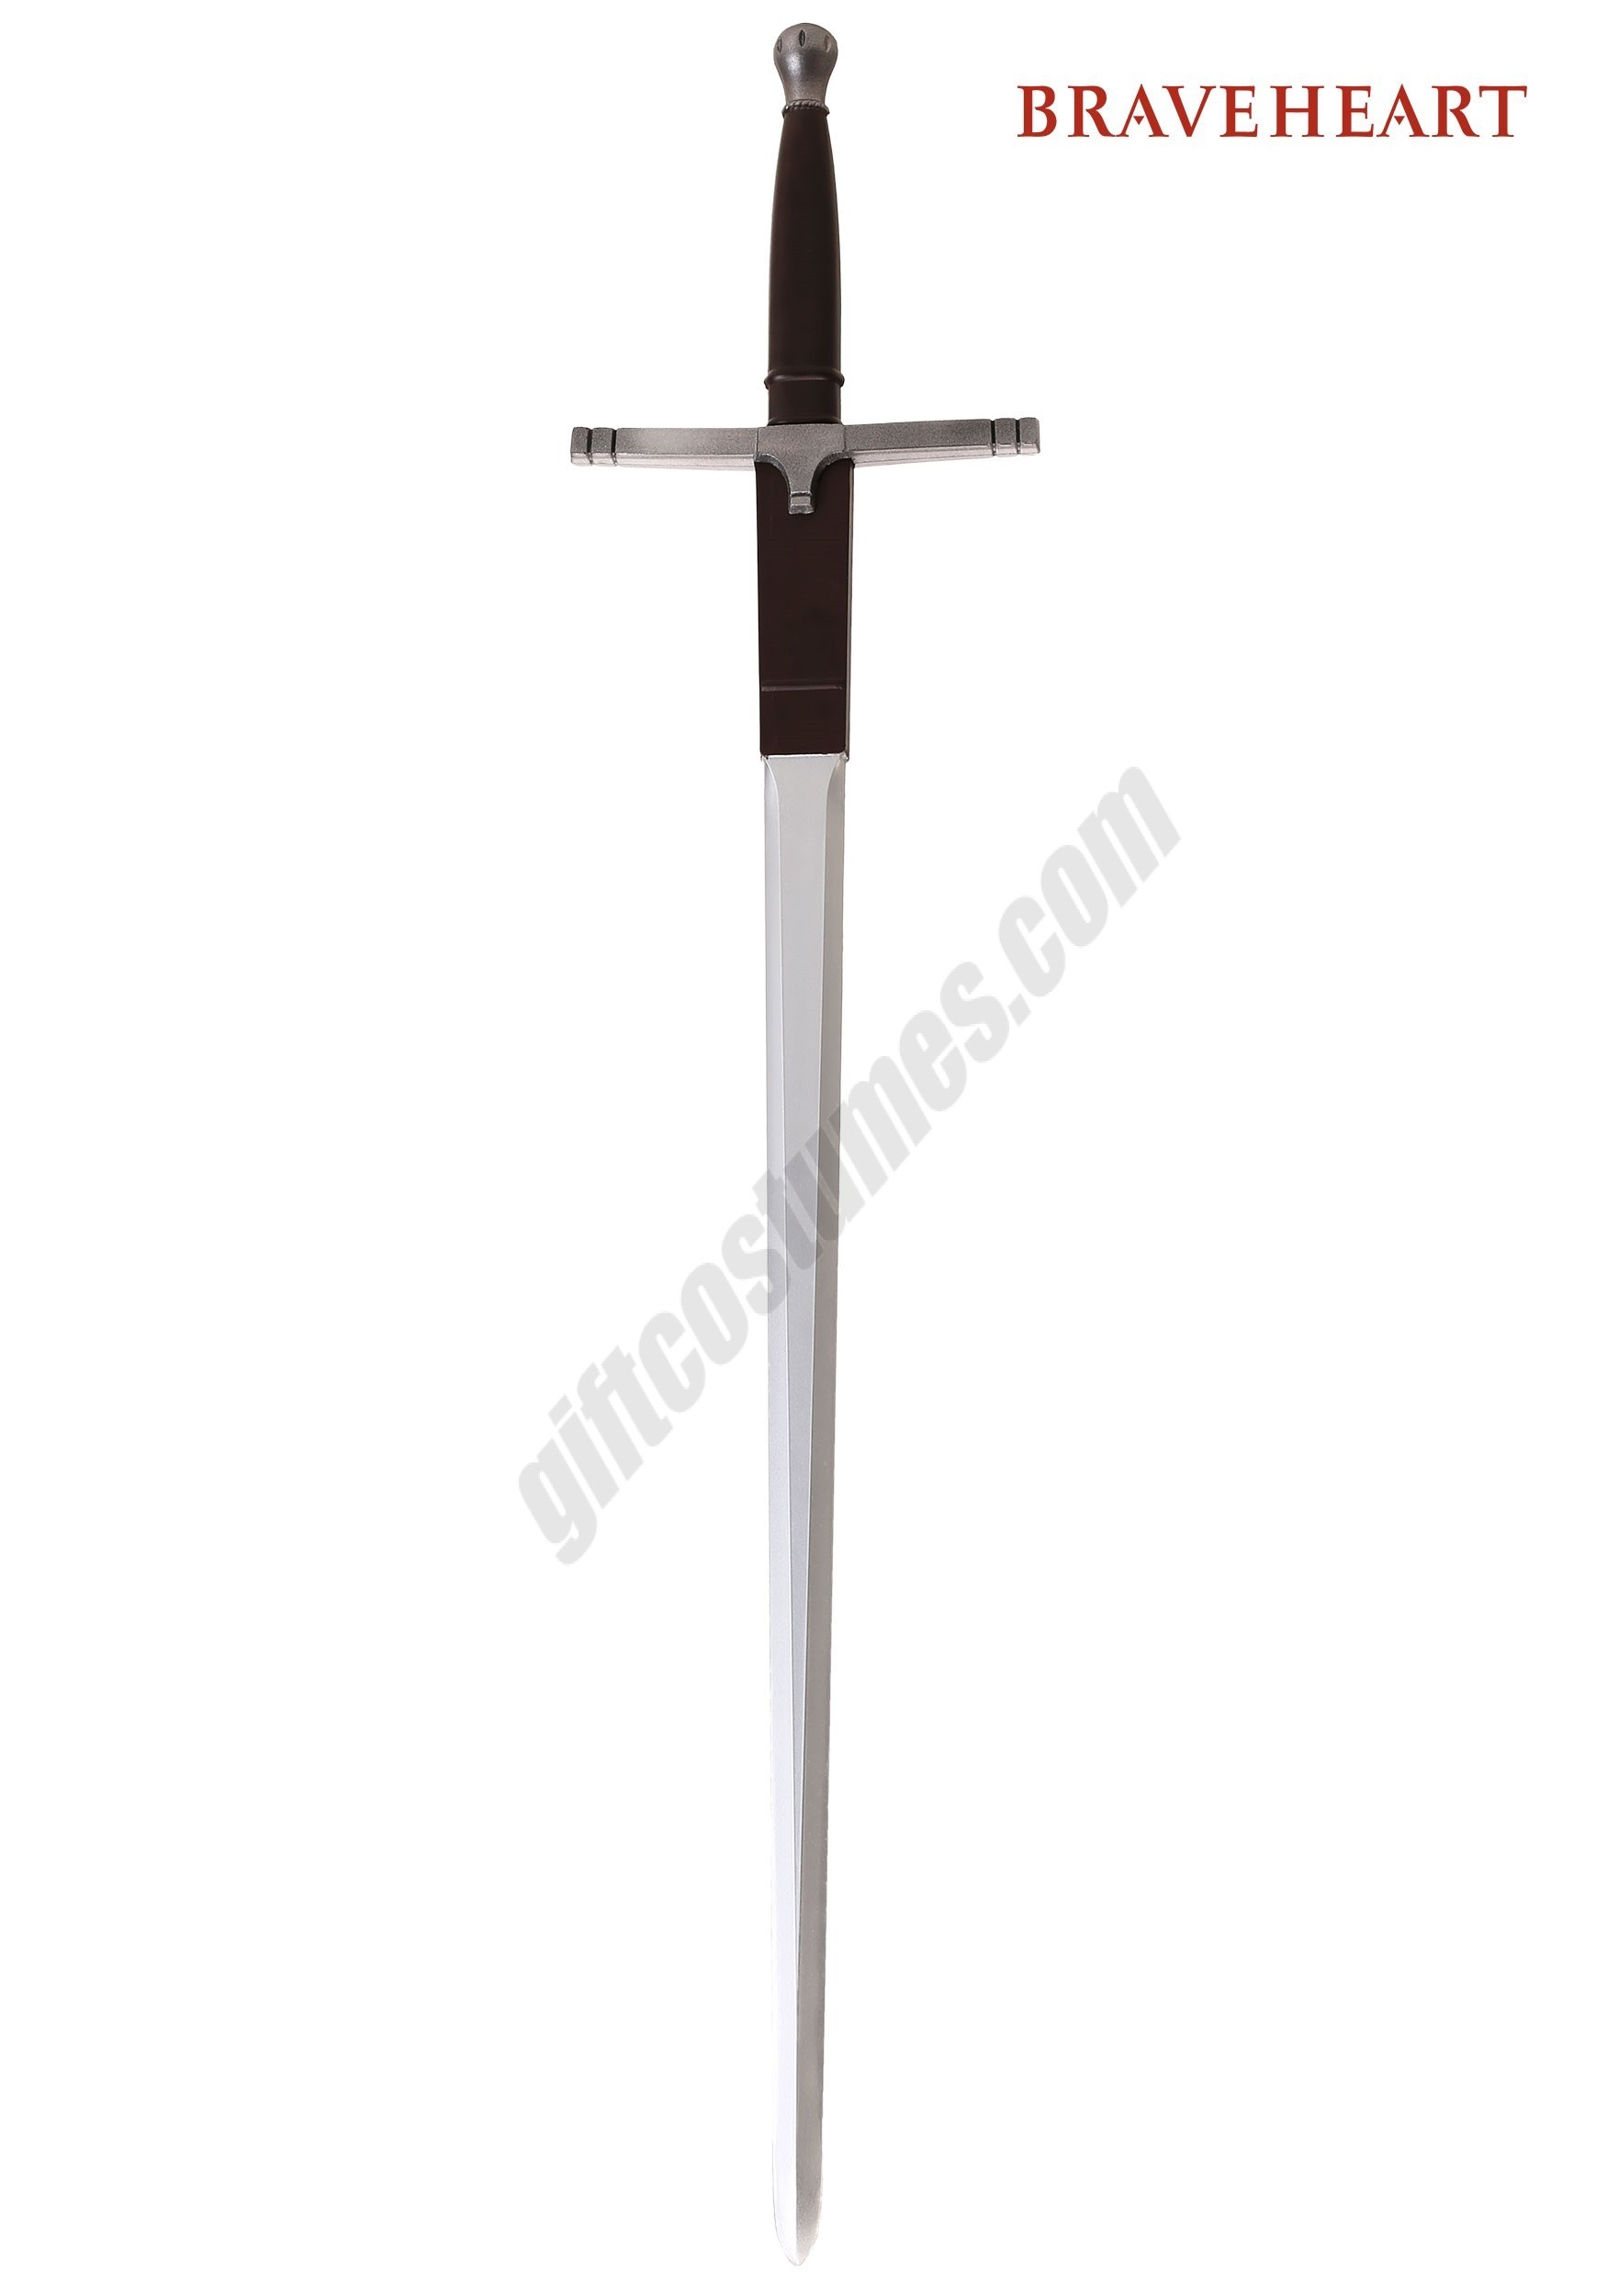 William Wallace Sword from Braveheart Promotions - William Wallace Sword from Braveheart Promotions